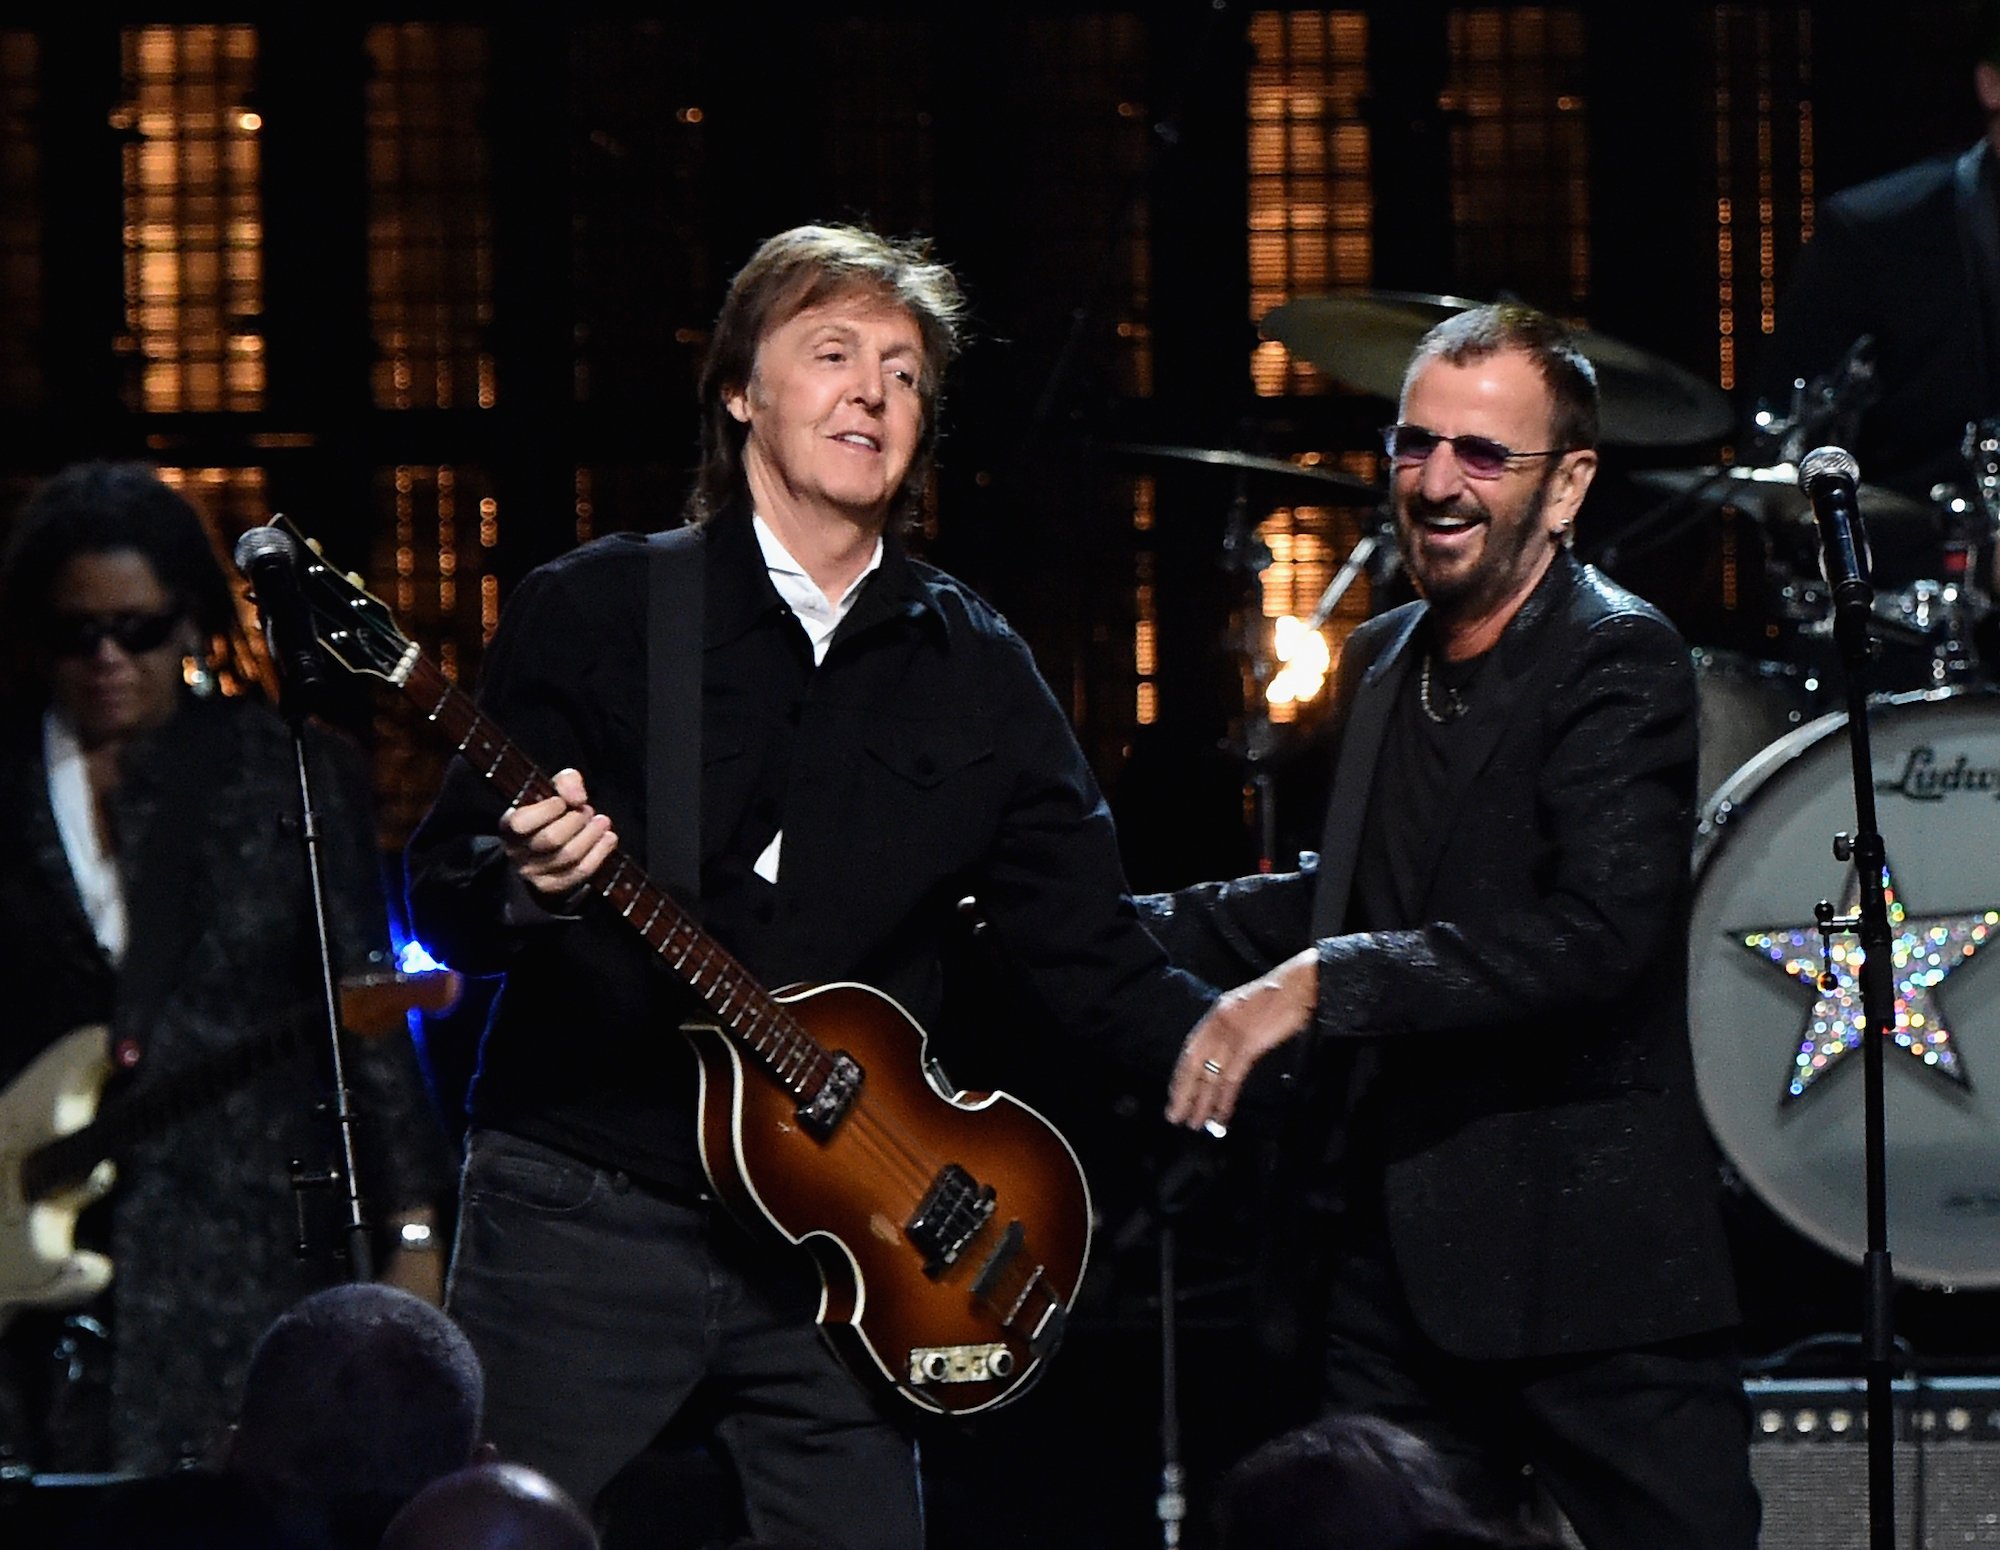 Paul McCartney and Ringo Starr perform during the 30th Annual Rock and Roll Hall of Fame Induction Ceremony